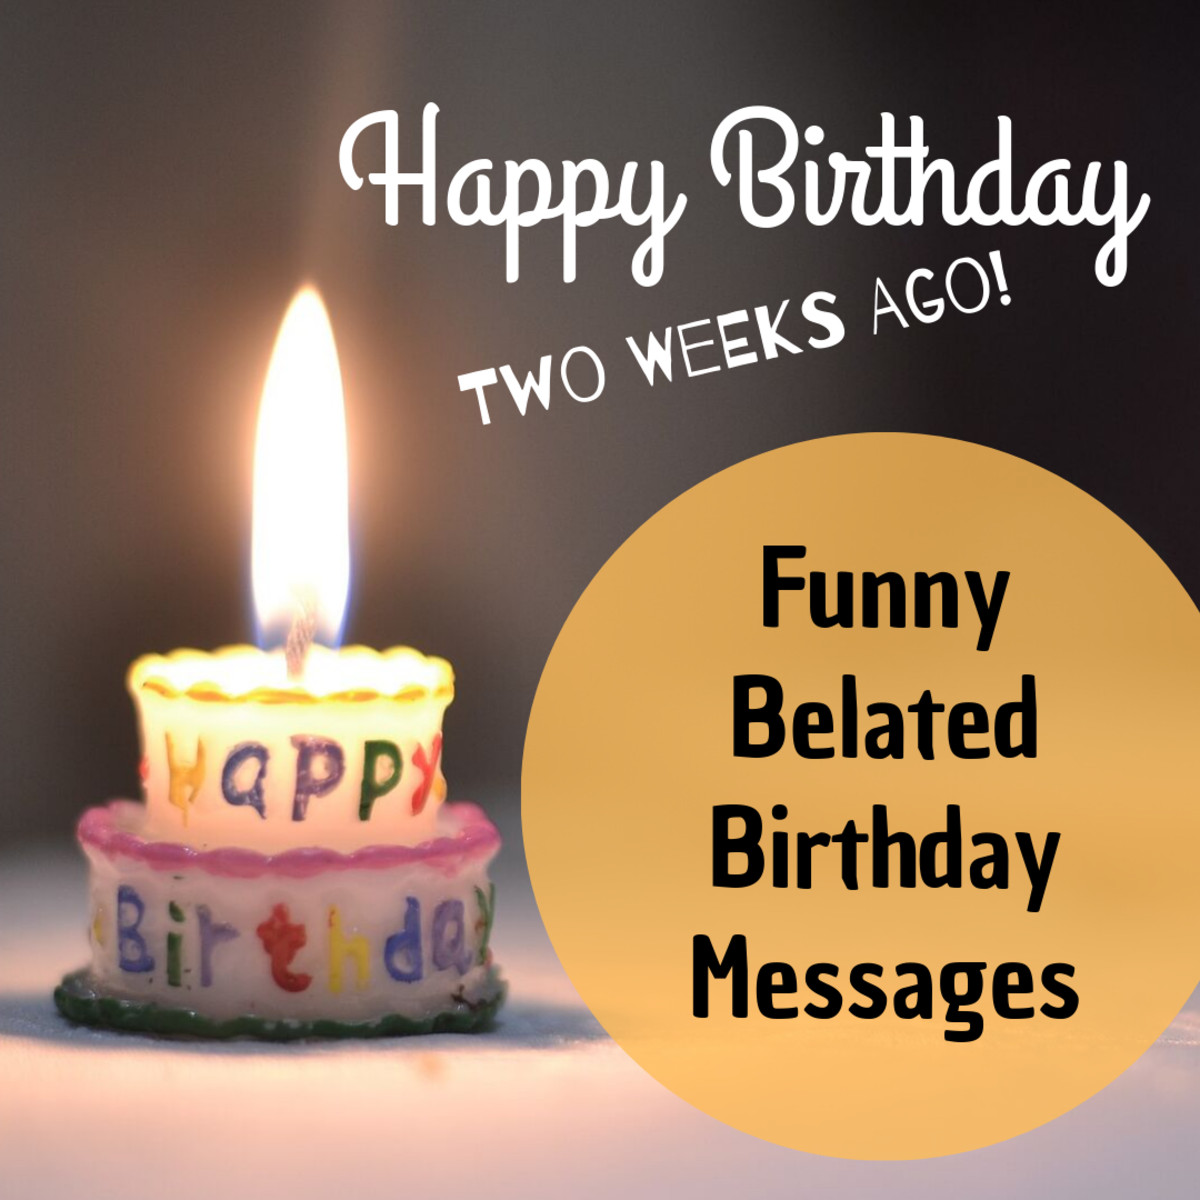 Belated Birthday Wishes
 Funny Belated Happy Birthday Wishes Late Messages and